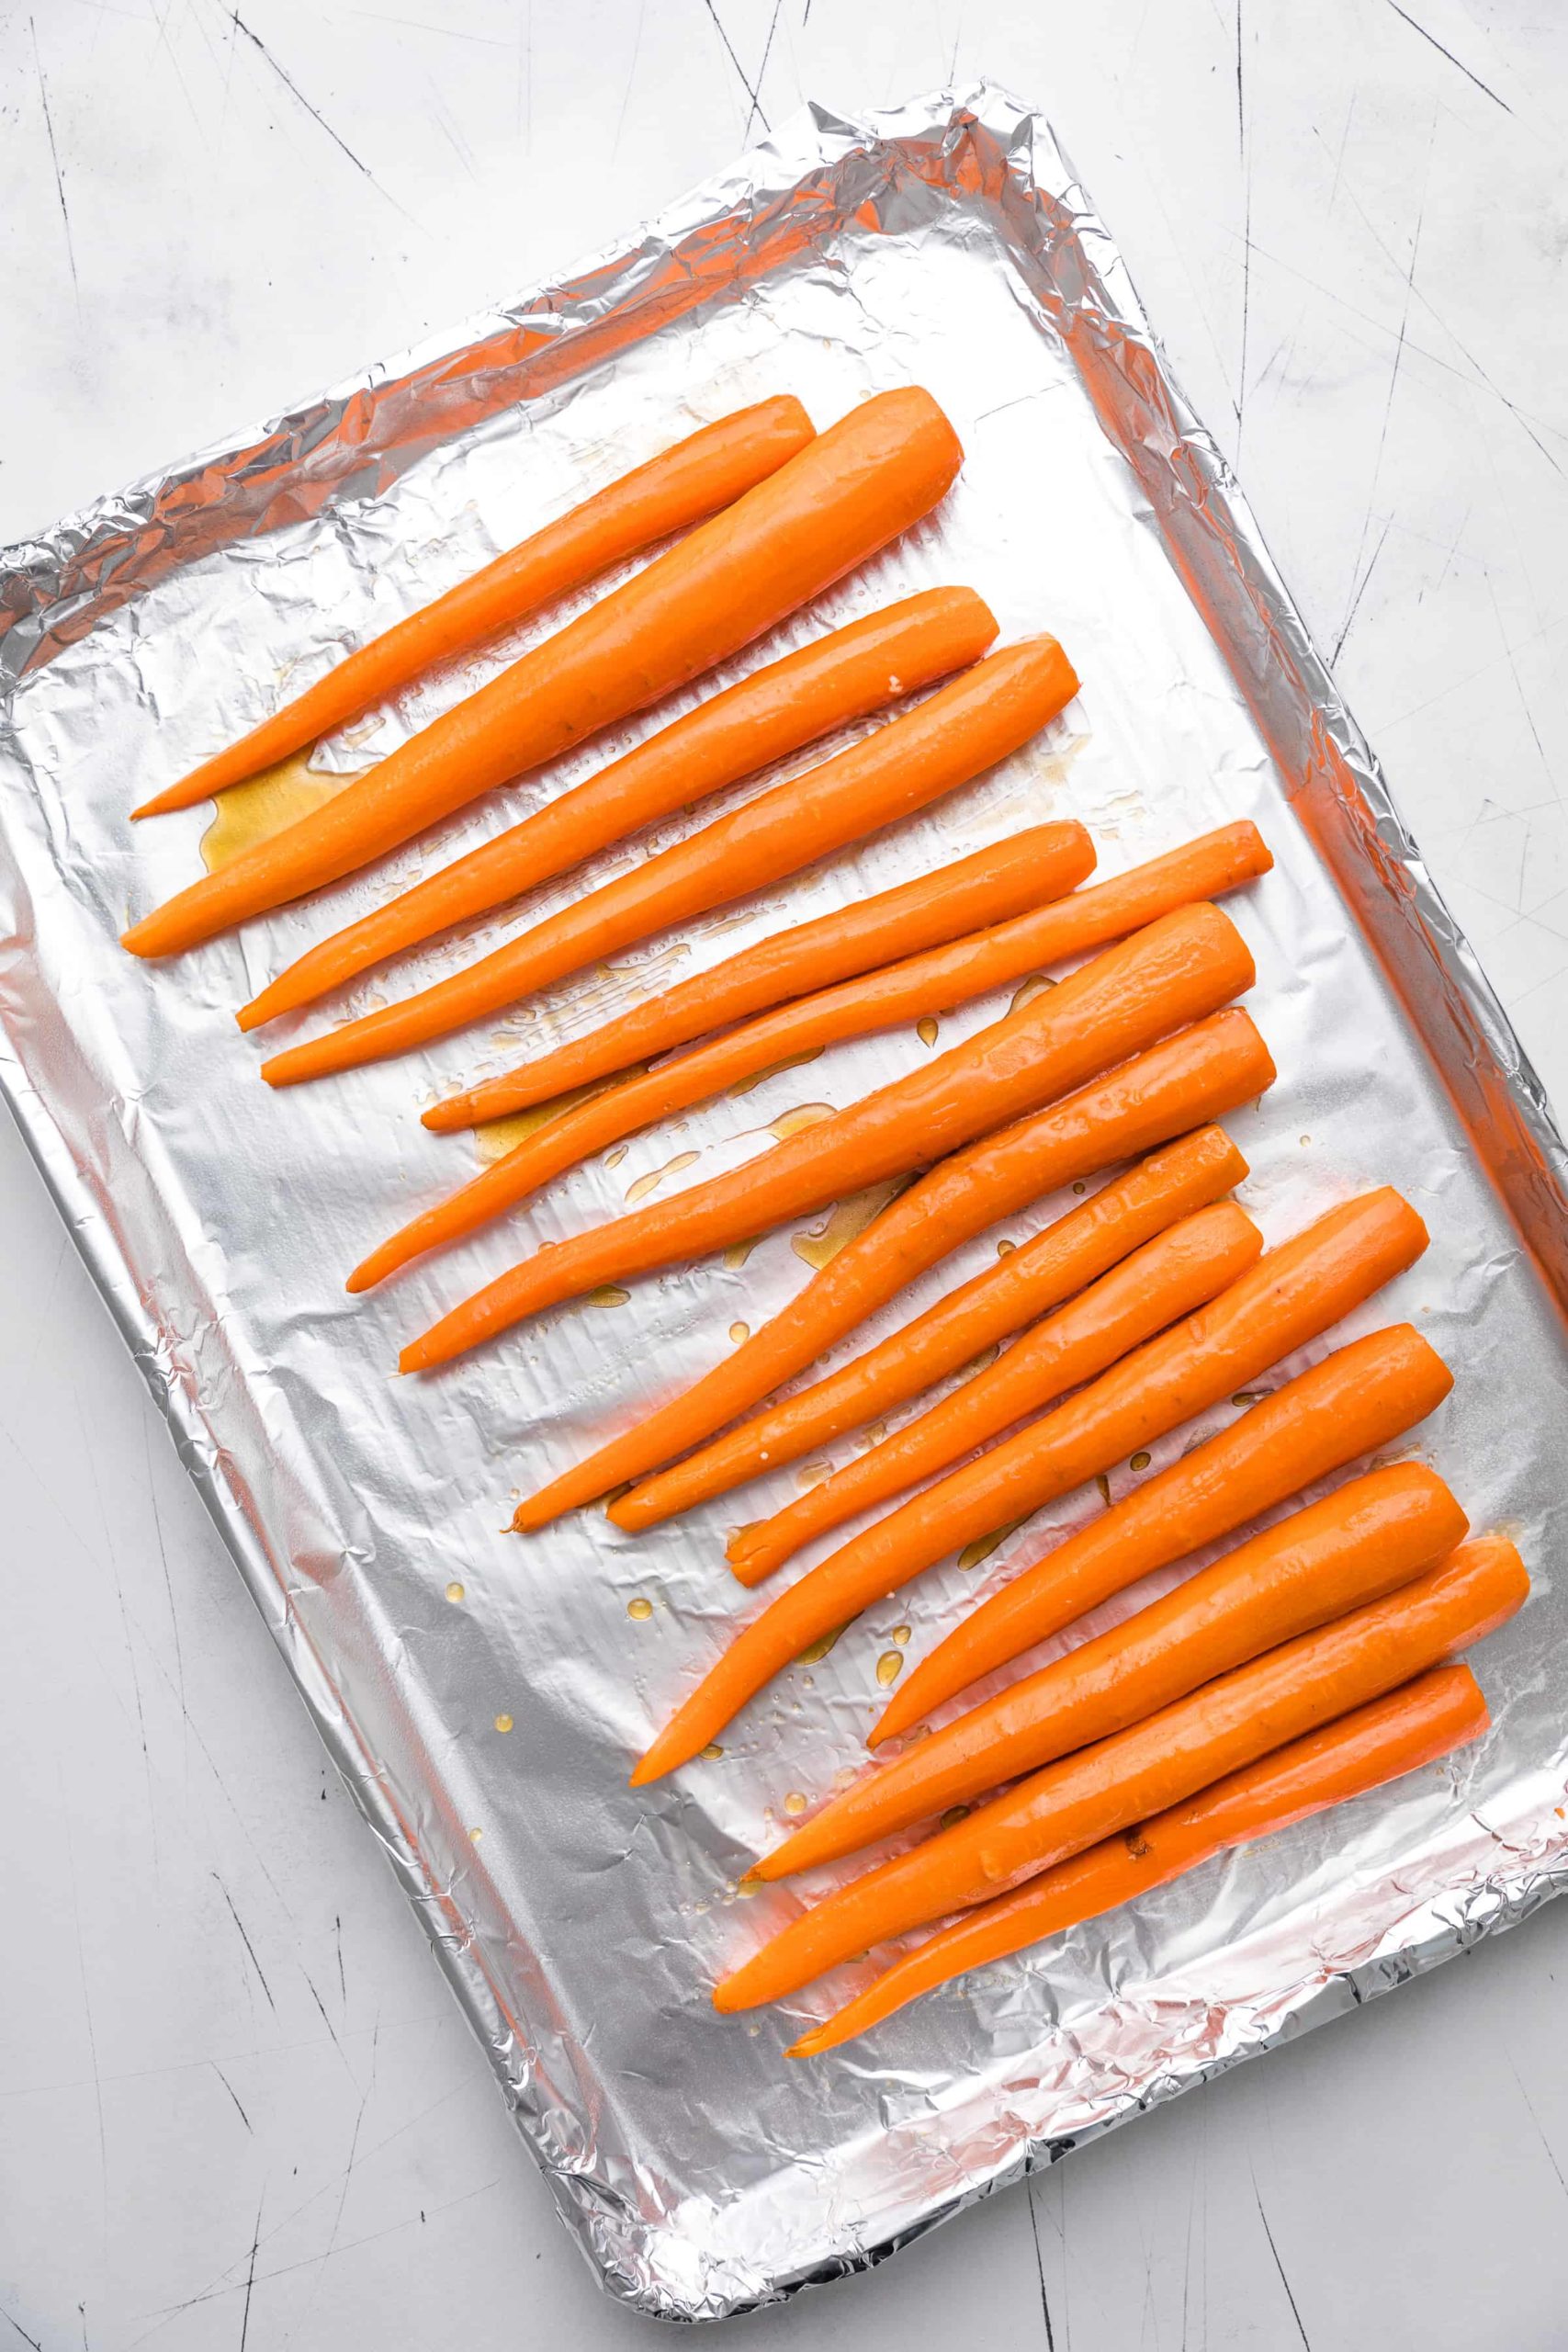 Whole carrots brushed with maple syrup and butter mixture.